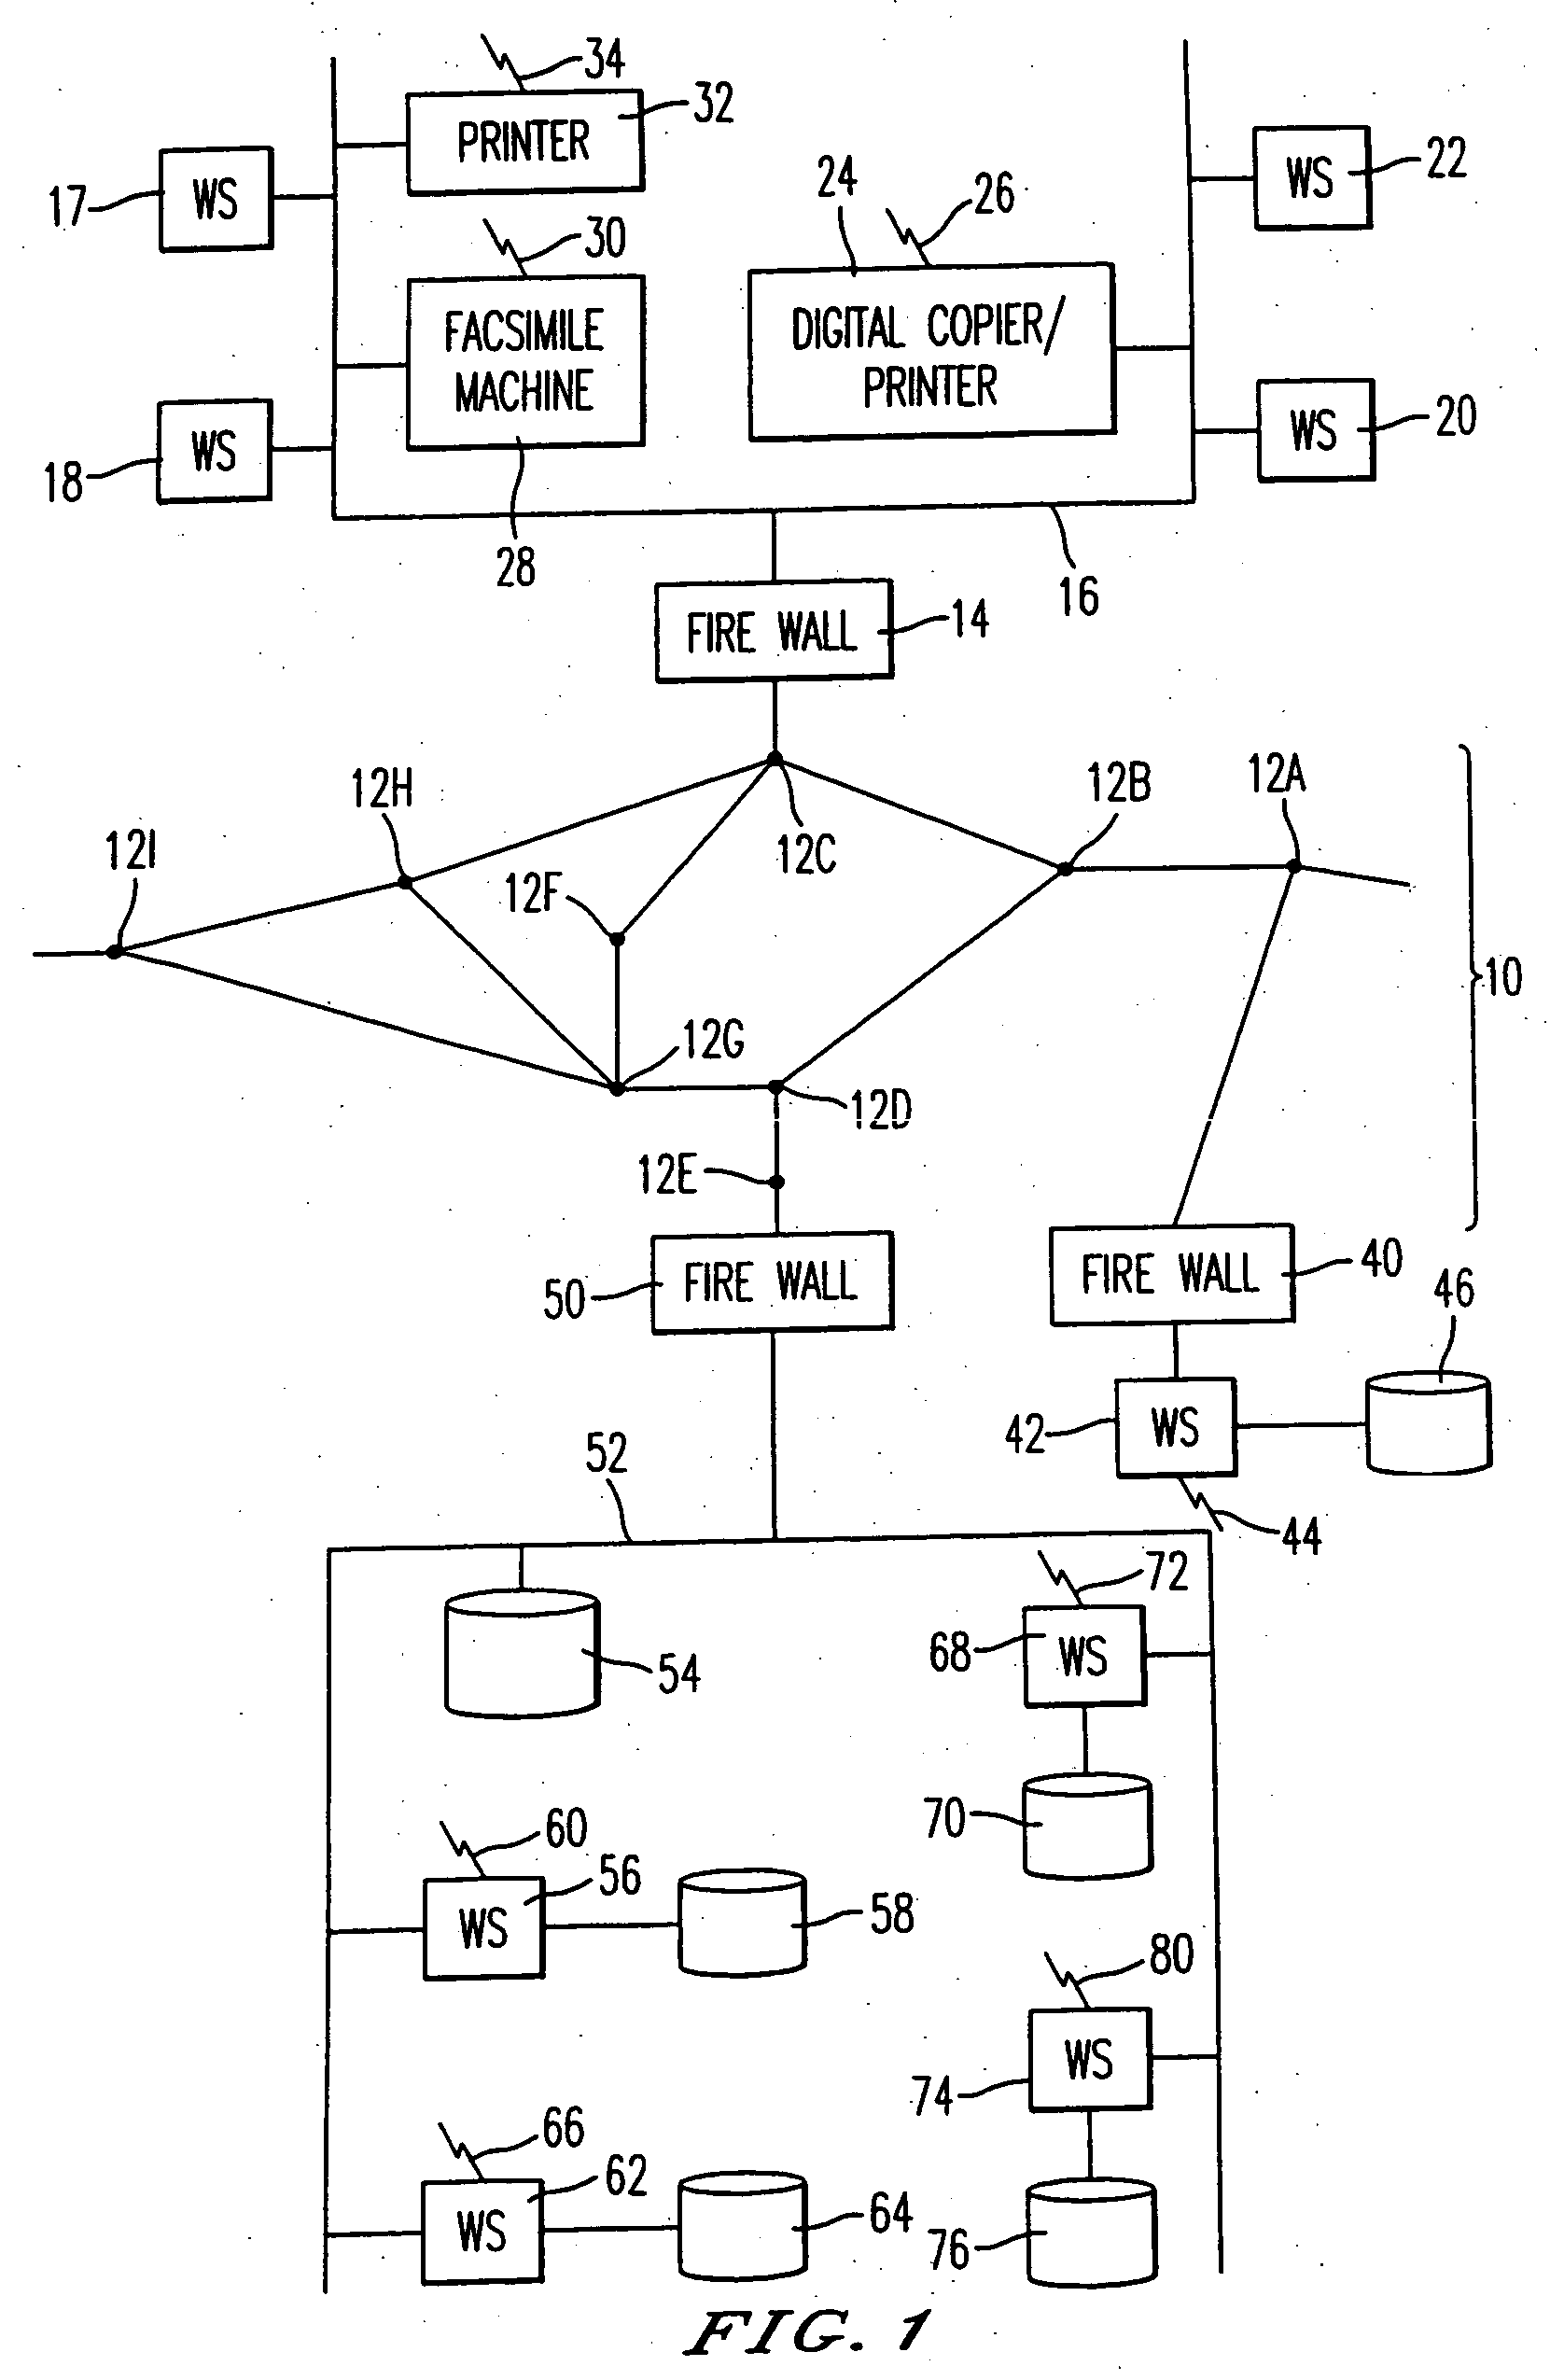 Method and system for diagnosis and control of machines using connectionless modes having delivery monitoring and an alternate communication mode